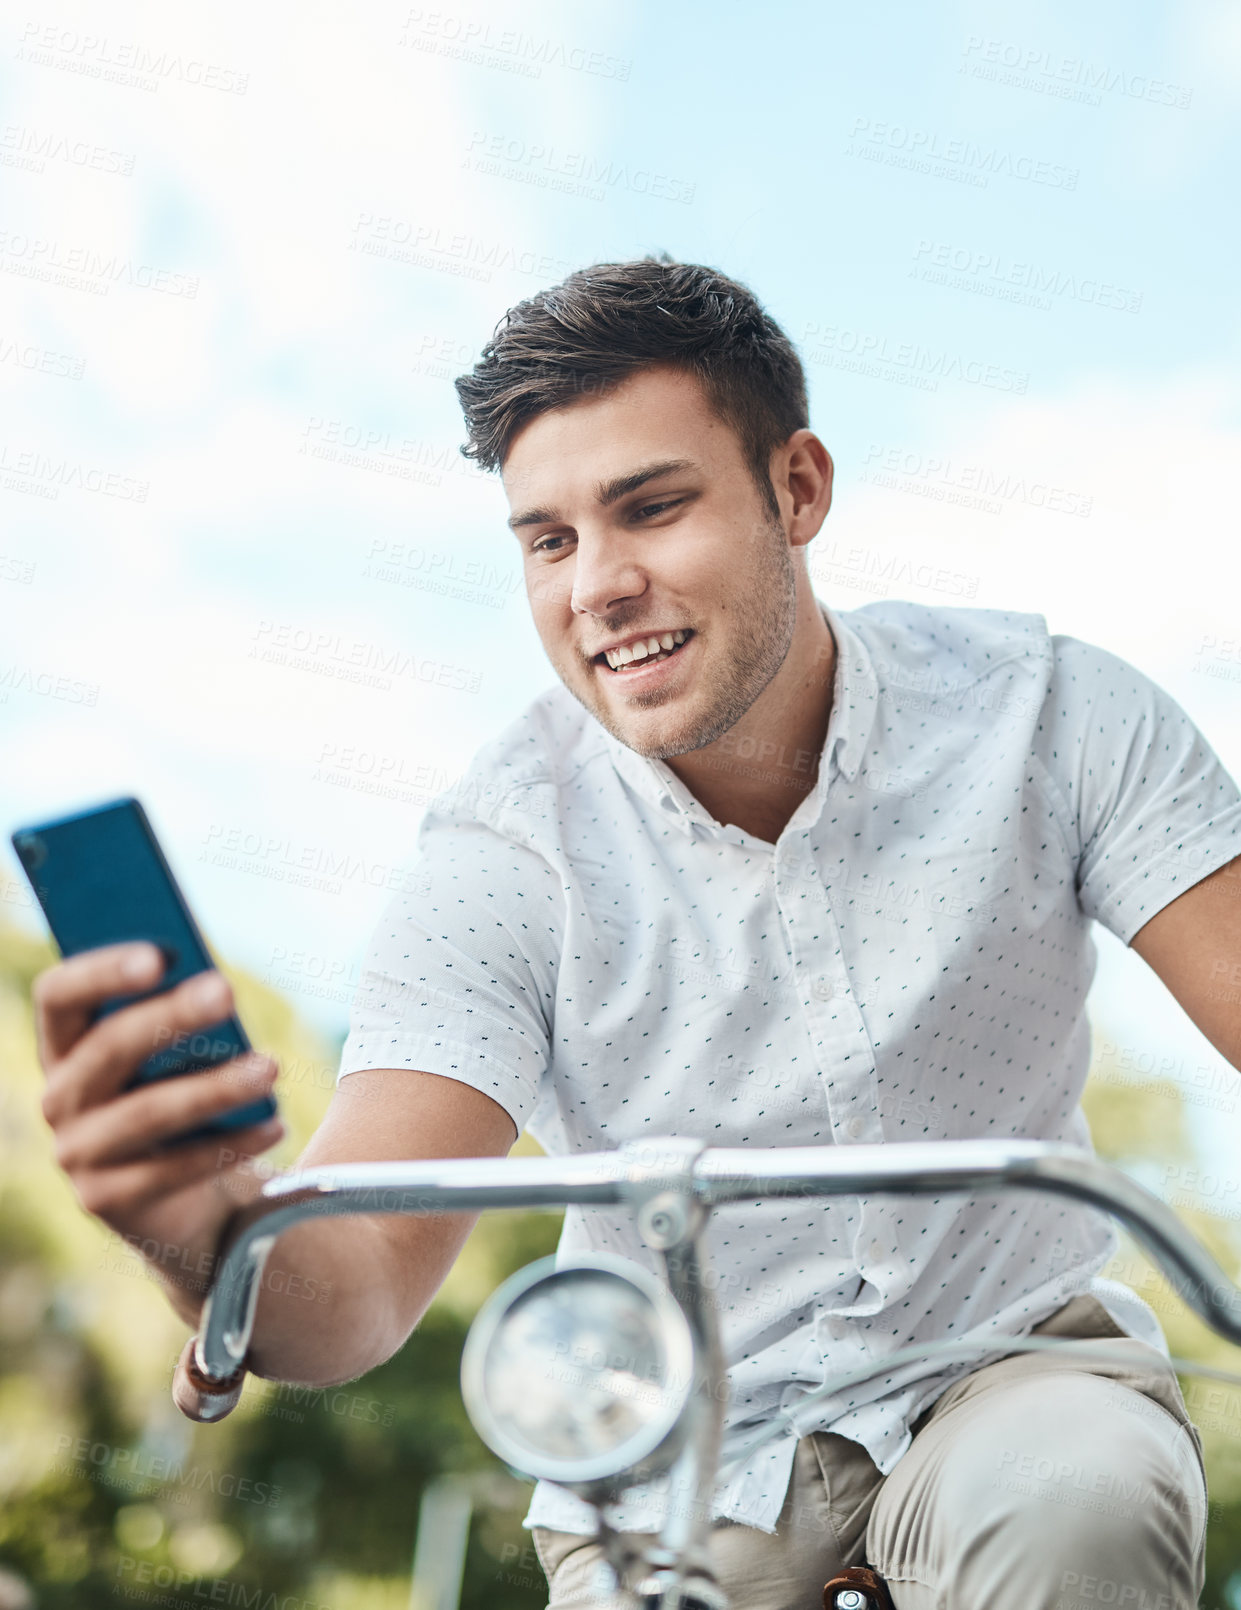 Buy stock photo Shot of a young businessman using a smartphone while riding his bicycle in the city